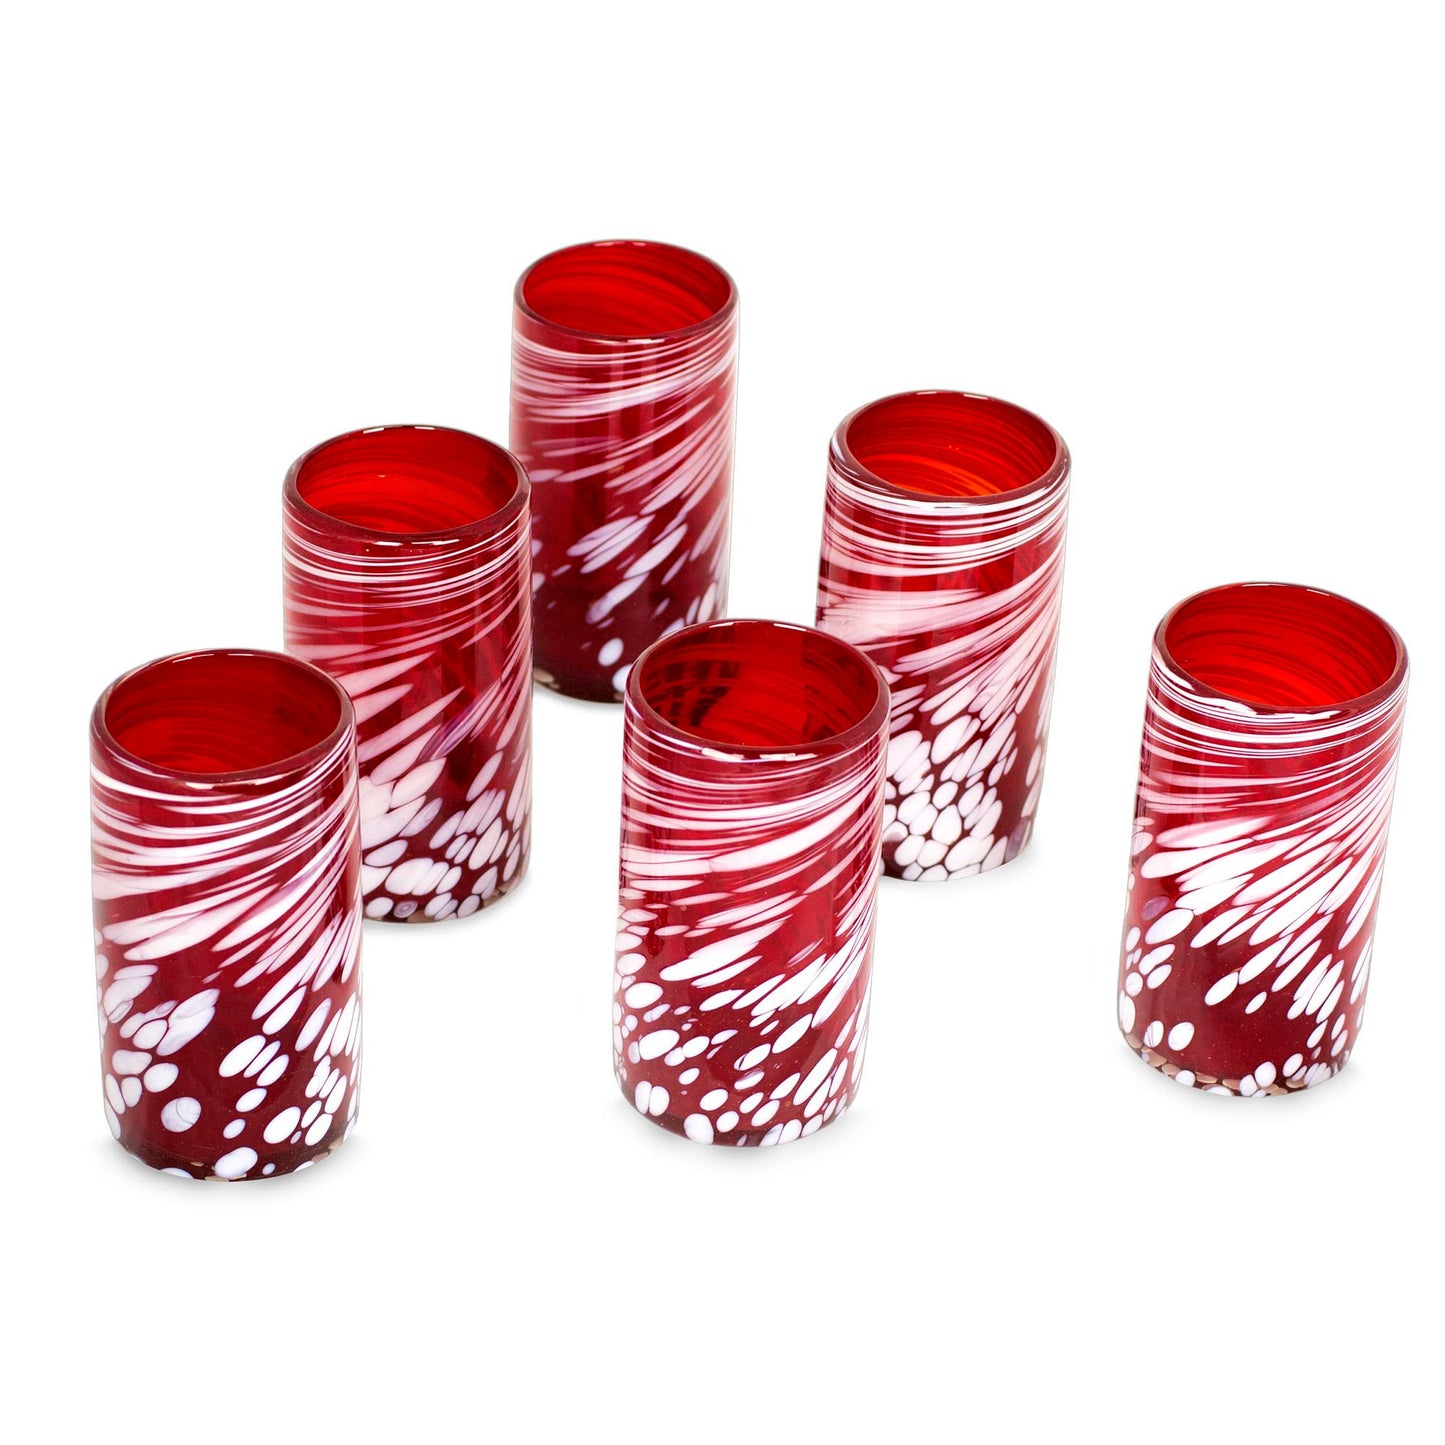 Festive Red Set of 6 Red Artisan Crafted Hand Blown Glasses